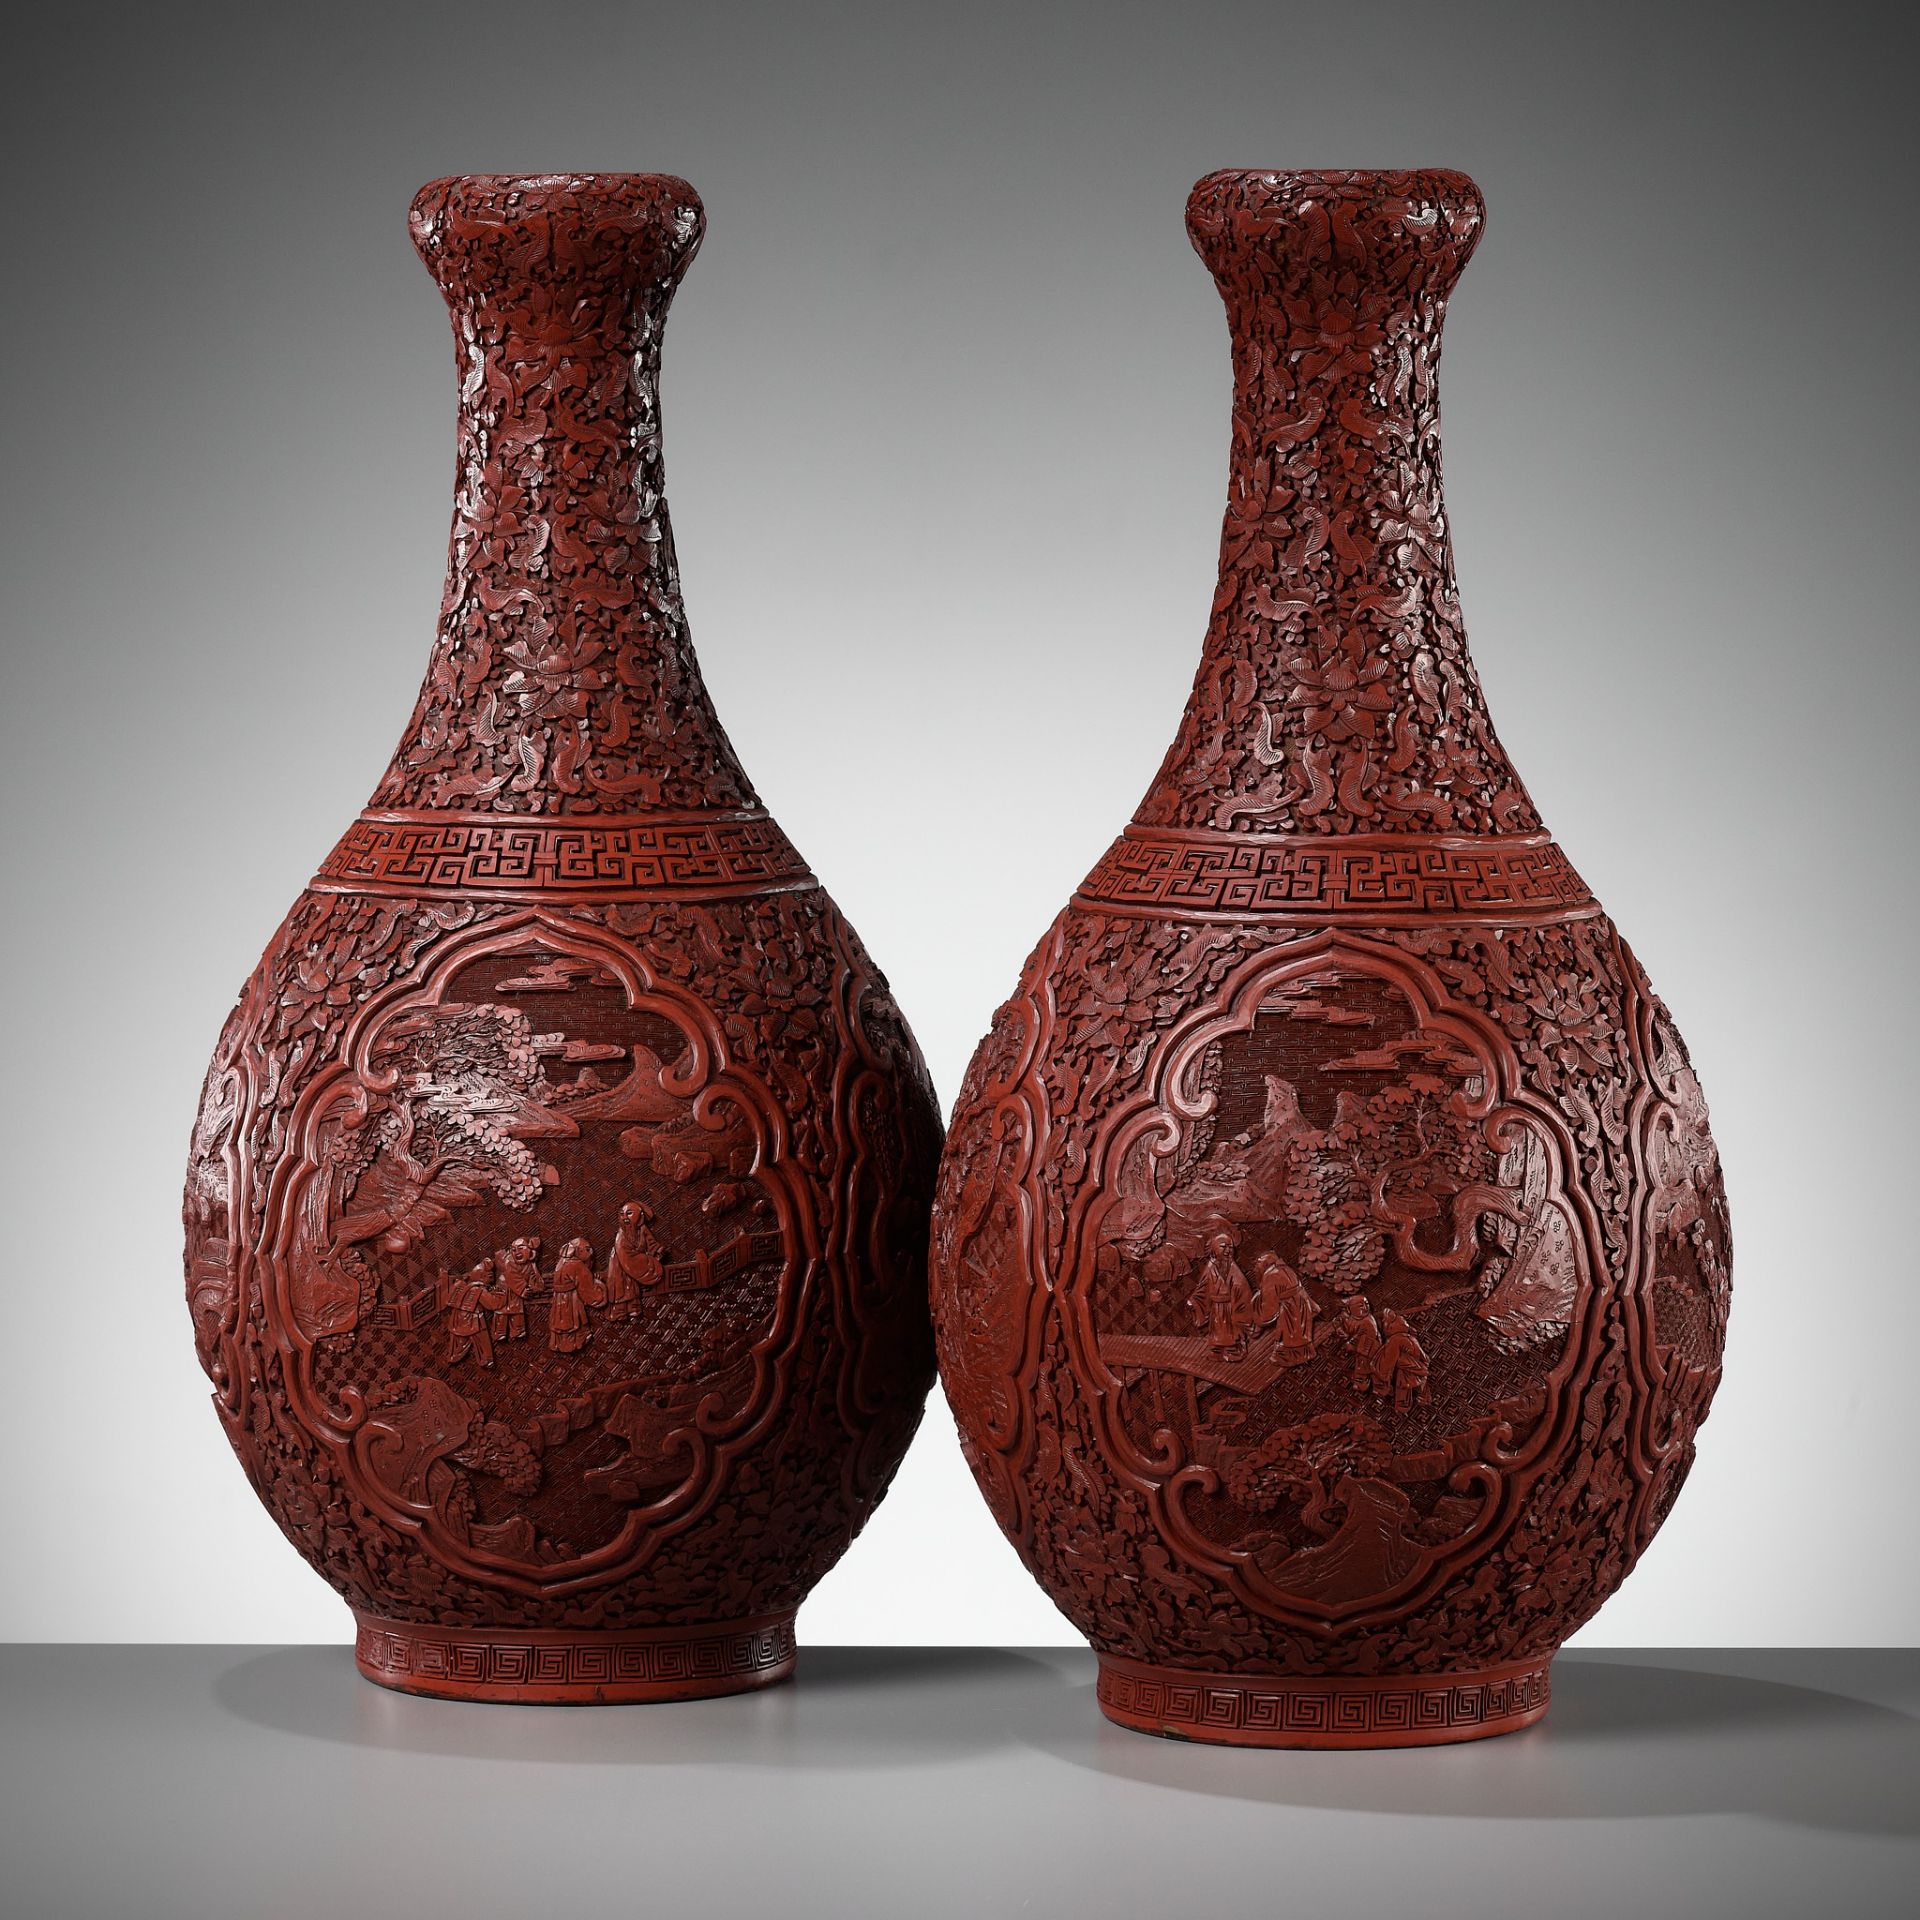 A PAIR OF LARGE CINNABAR LACQUER GARLIC HEAD VASES, CHINA, 1800-1850